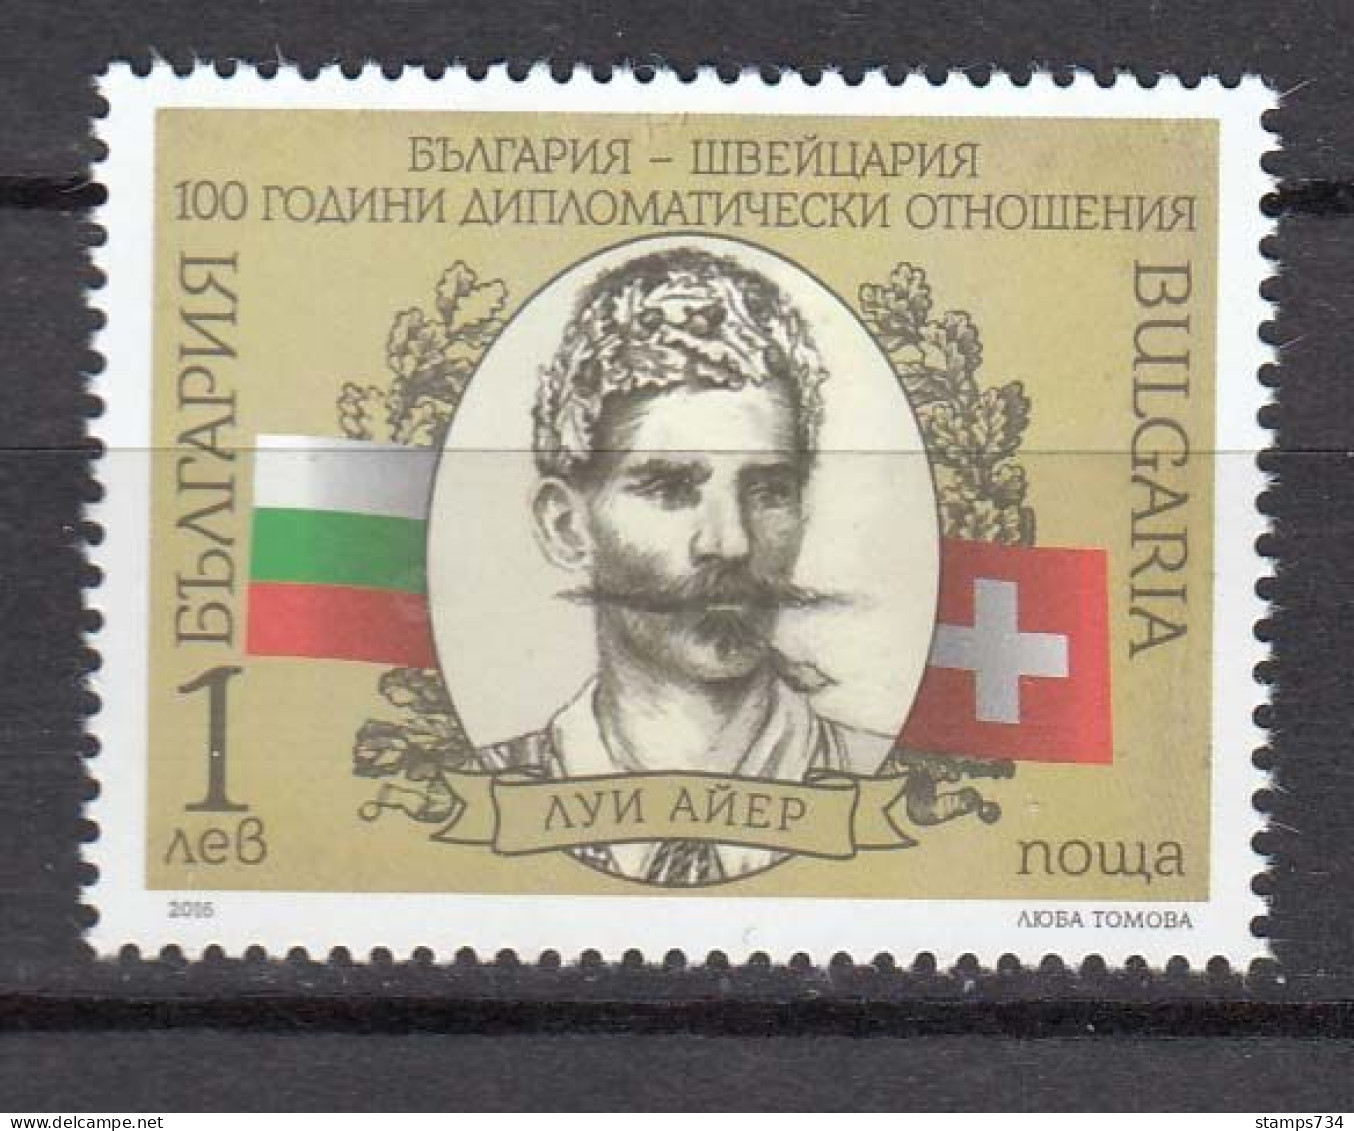 Bulgaria 2016 - 100 Years Of Diplomatic Relations With Switzerland, Mi-Nr. 5291, MNH** - Unused Stamps